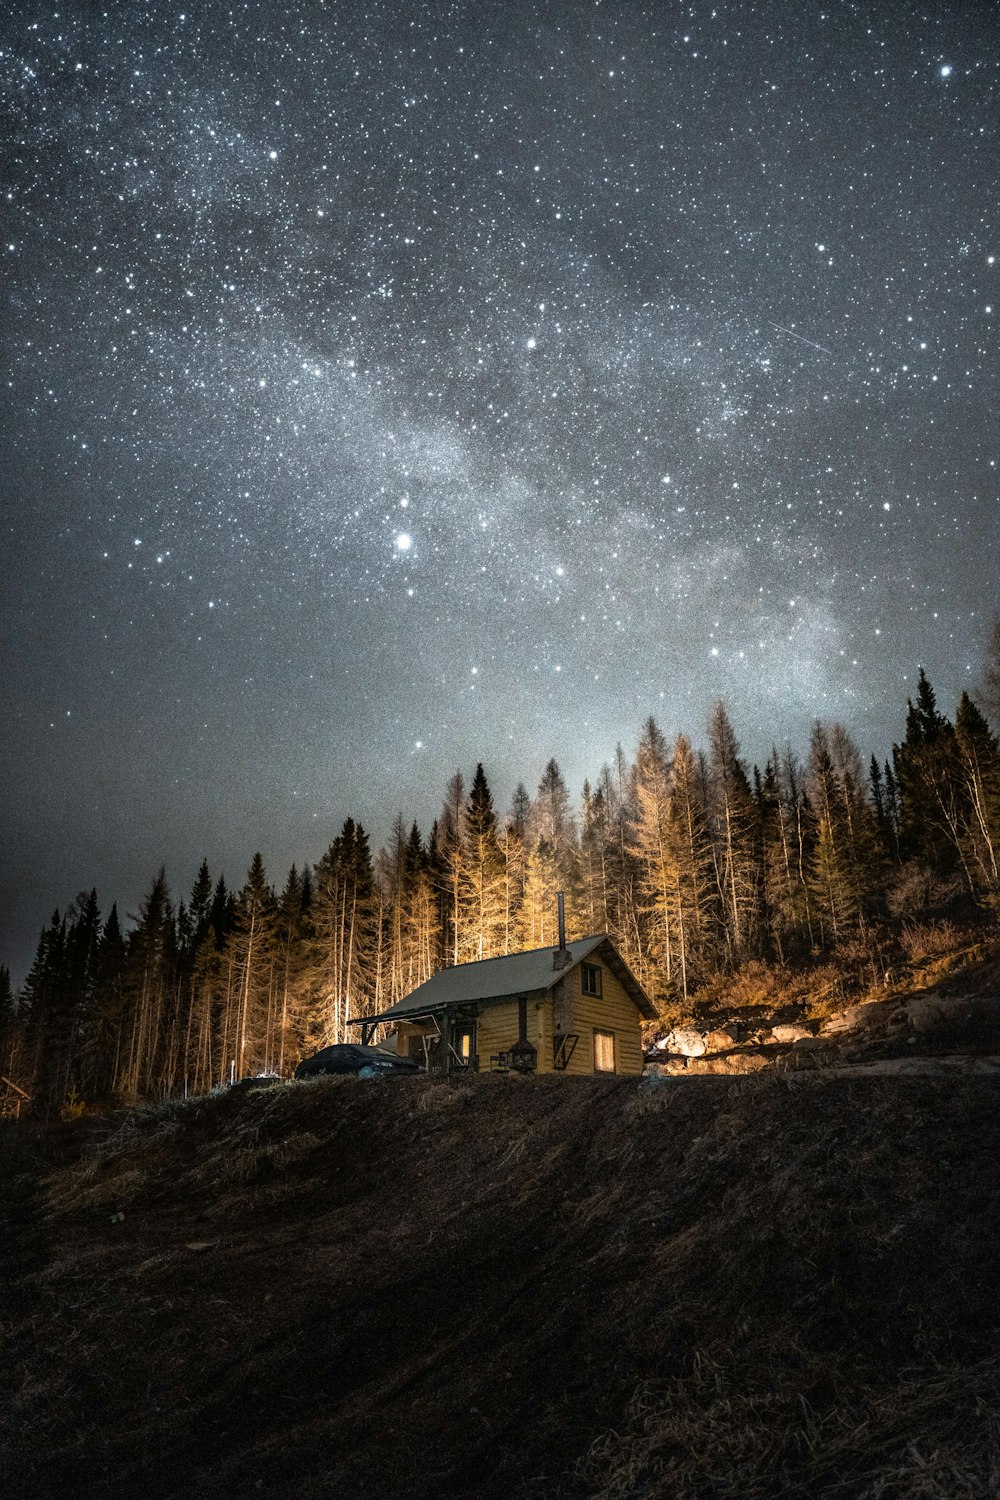 brown wooden house near trees under starry night